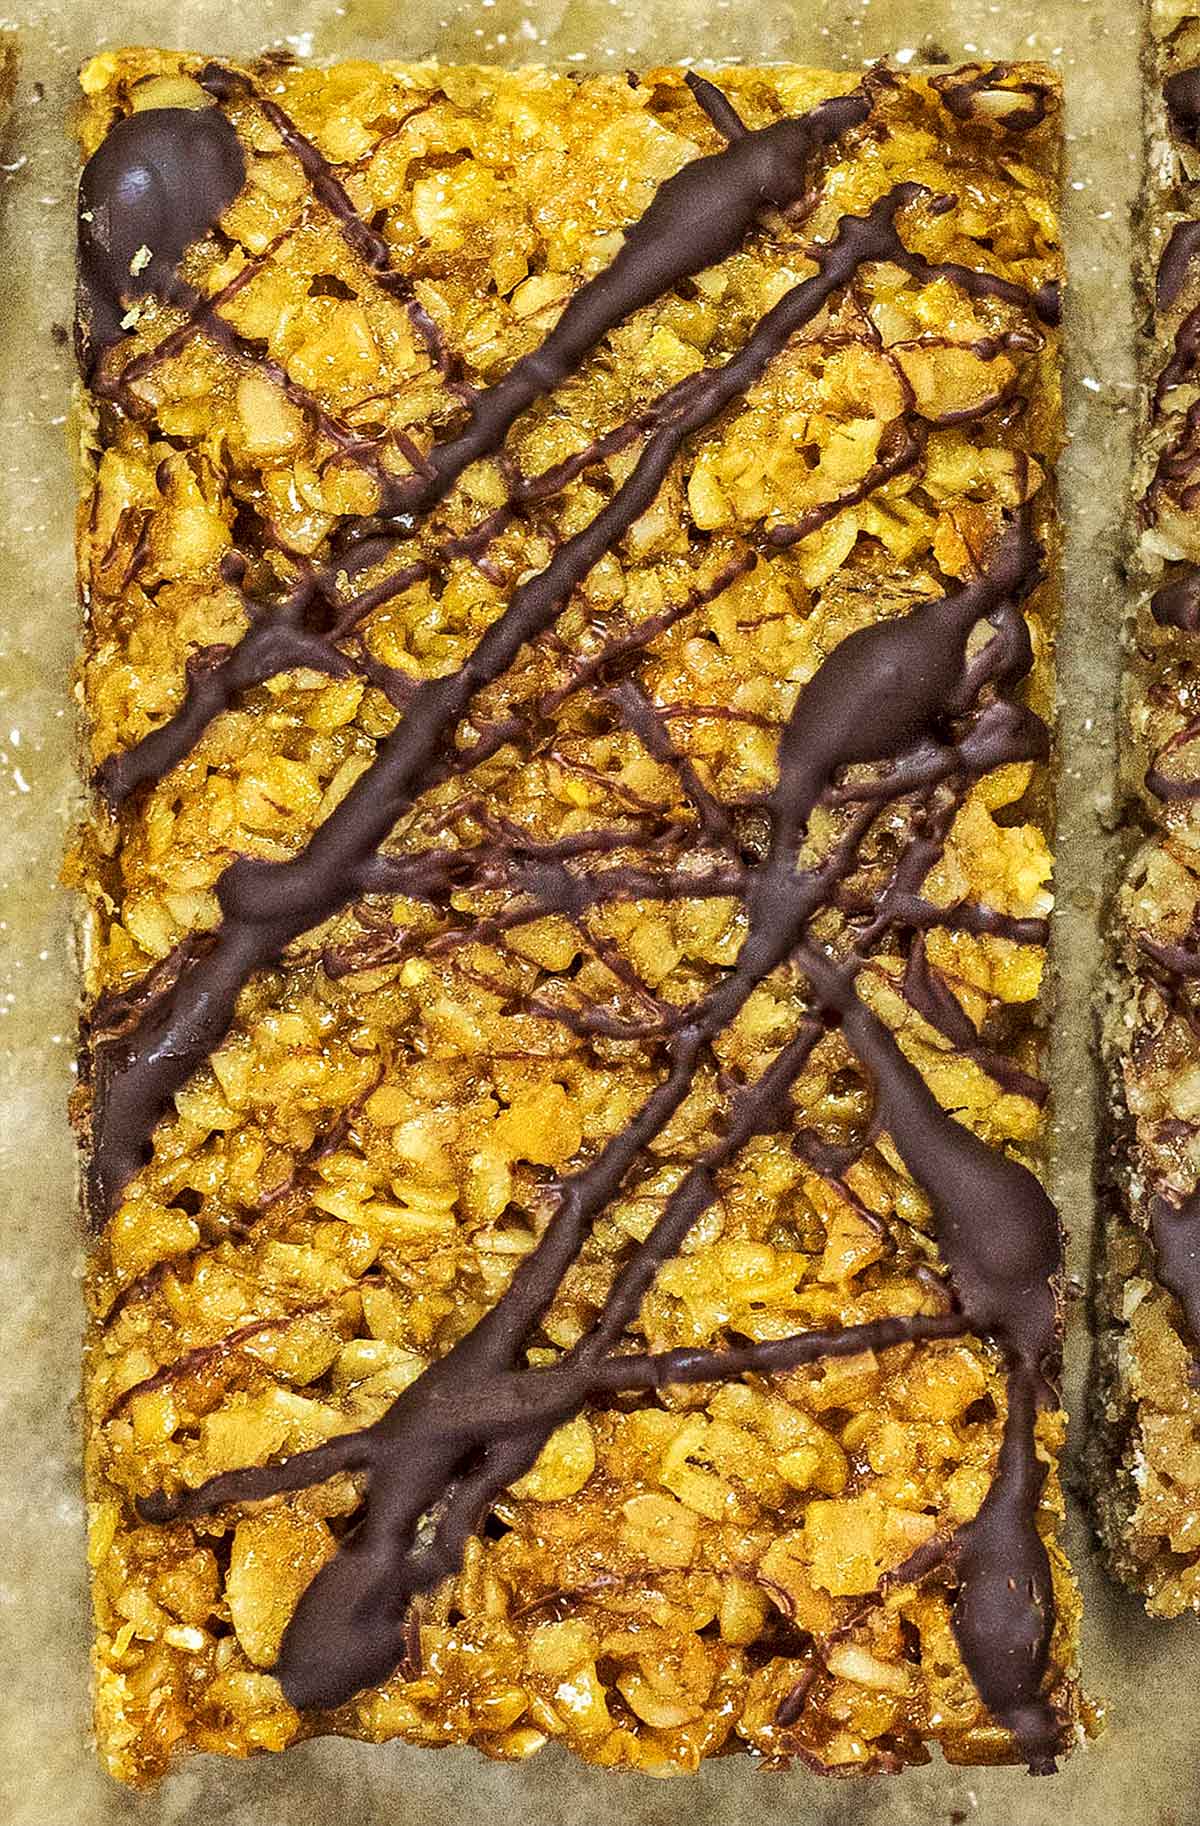 A flapjack with a random pattern of drizzled chocolate.